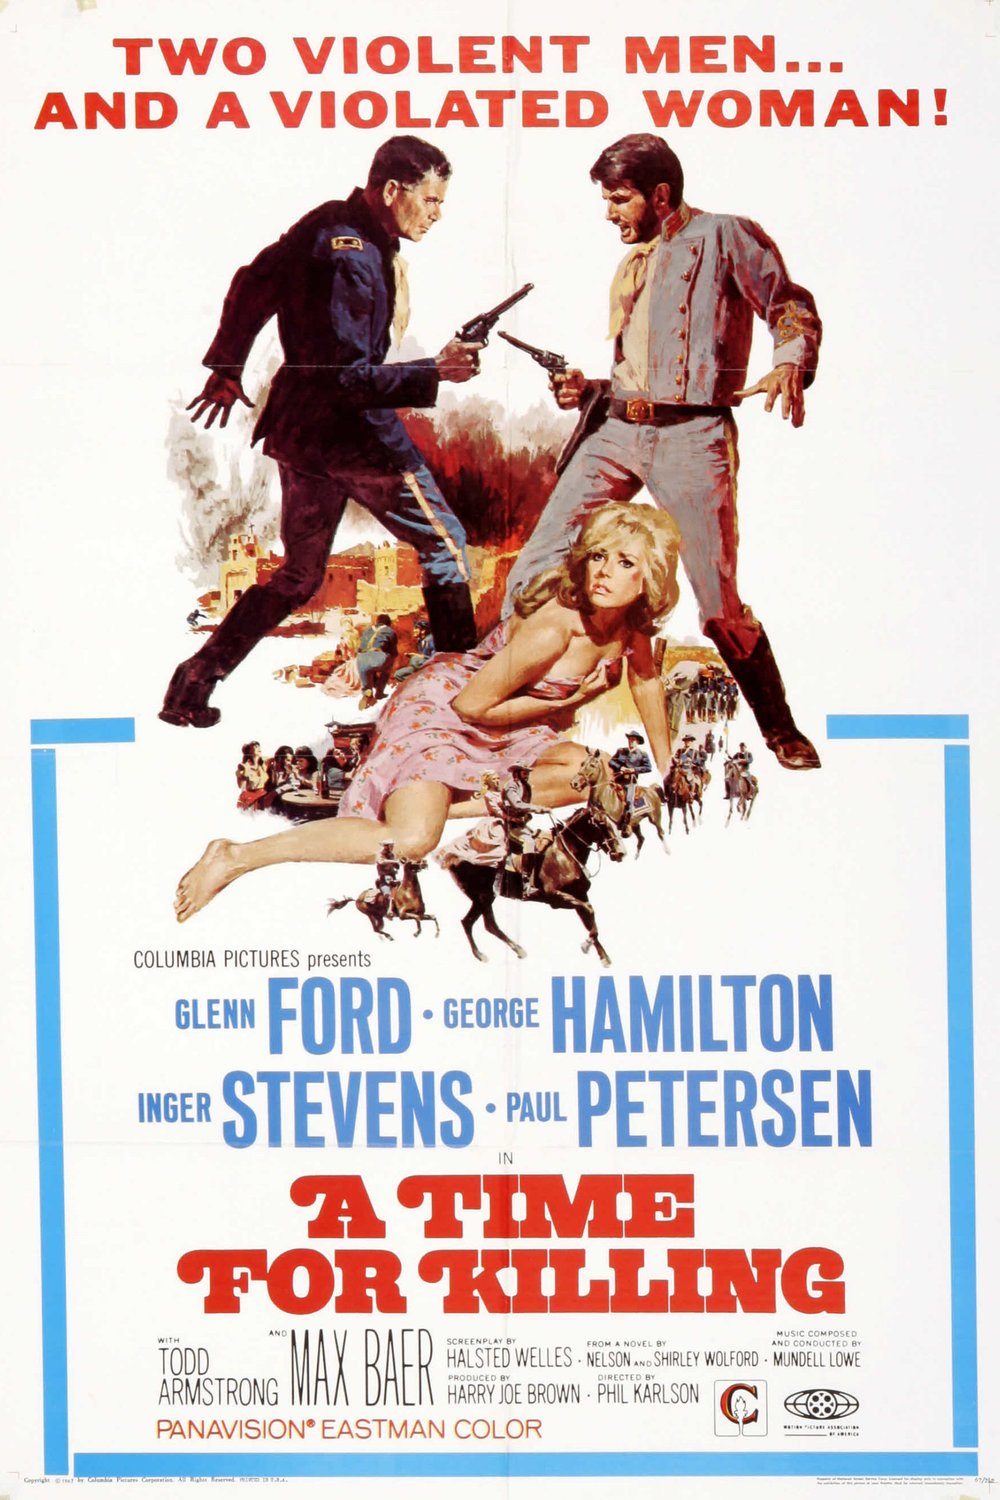 Poster of the movie A Time for Killing